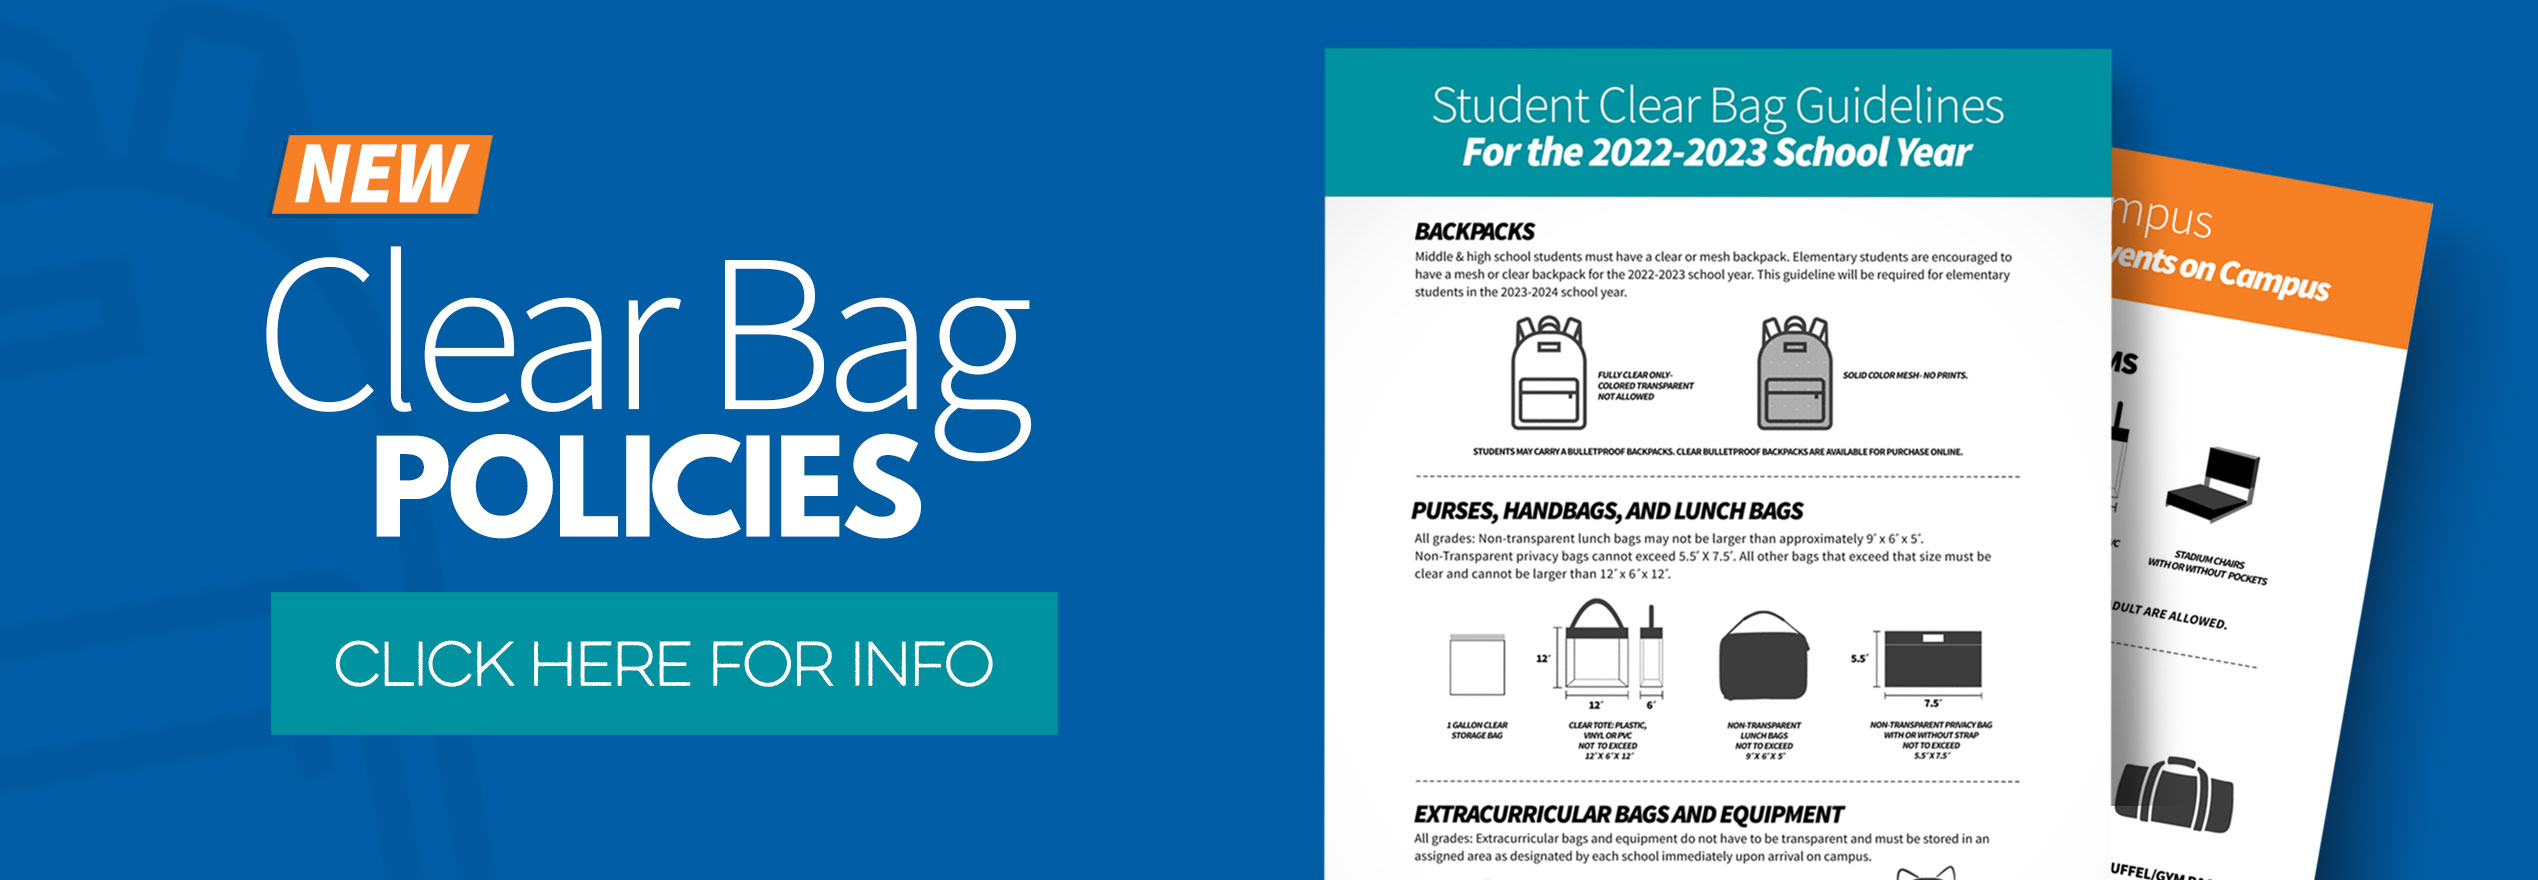 Guidelines for Clear Bags during the 2022-23 School year